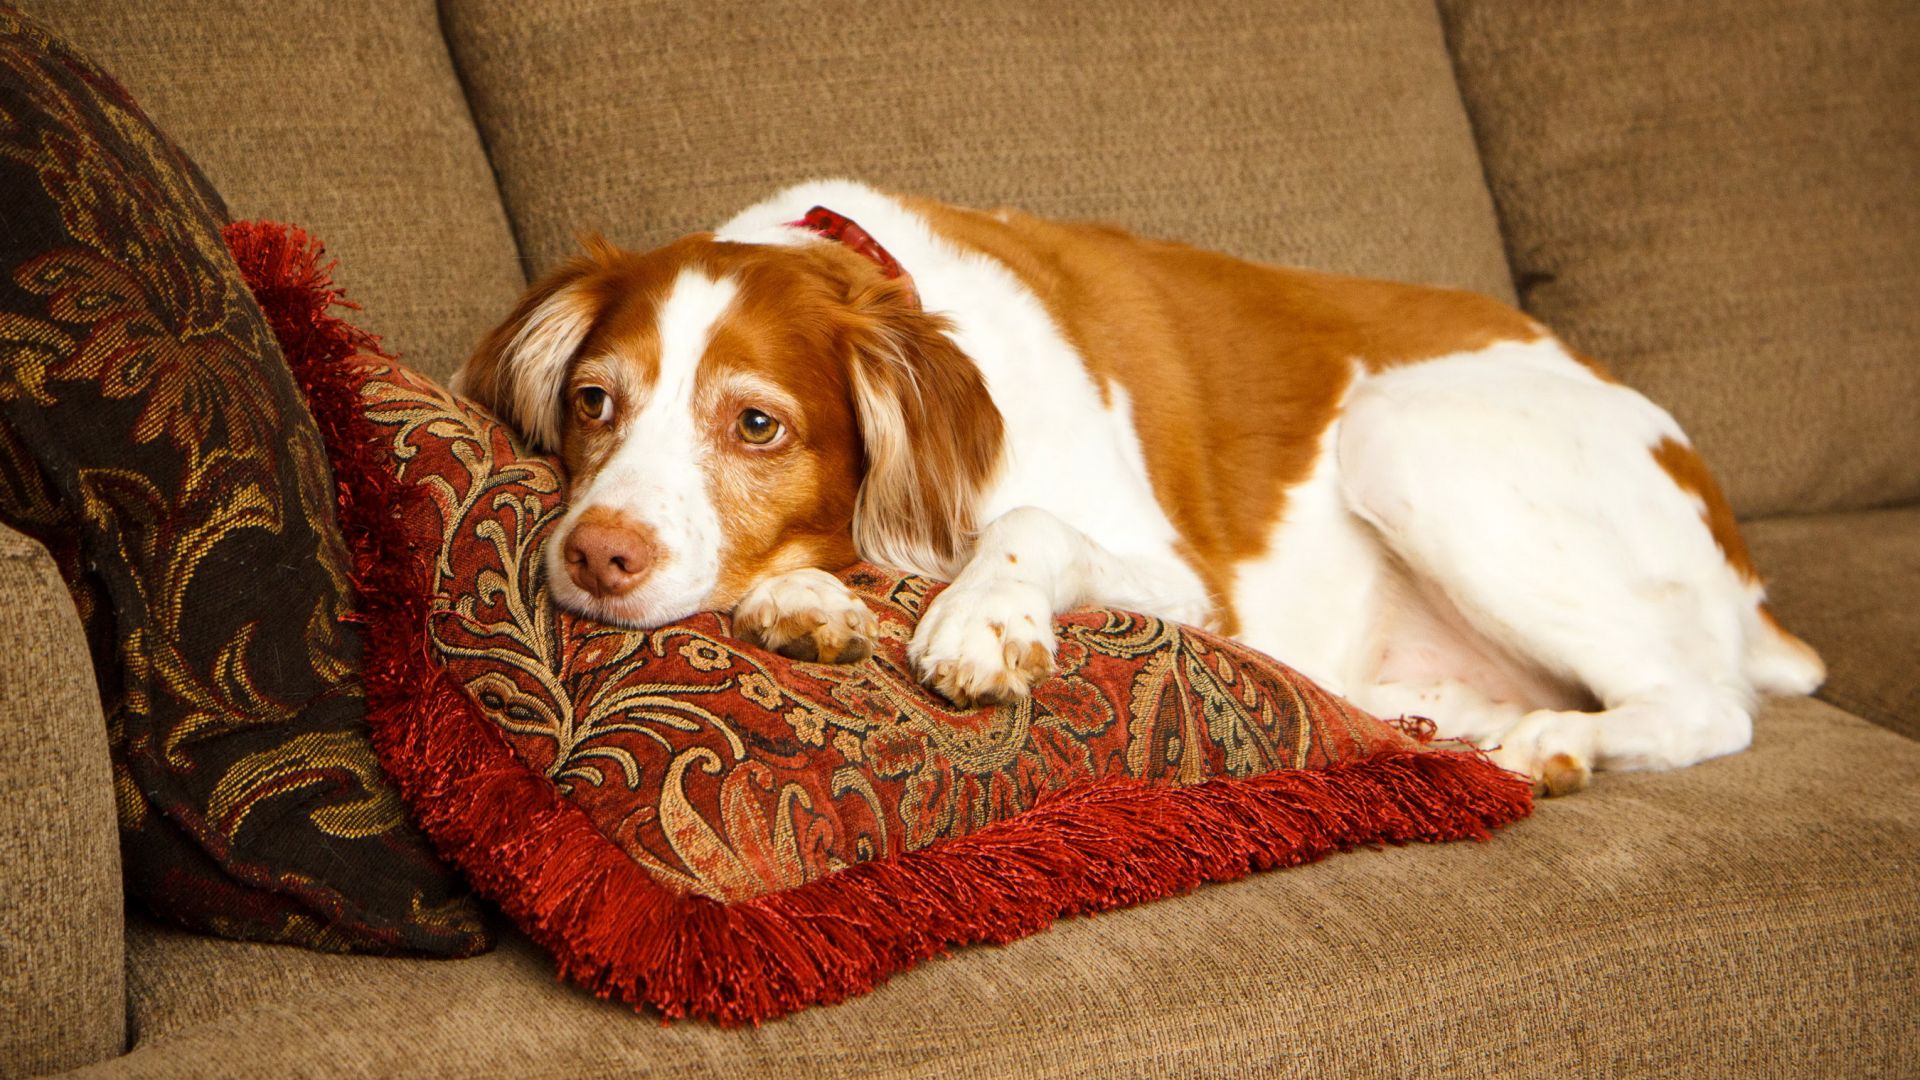 Wallpaper Dog on sofa, pet, spotted animal, relaxed